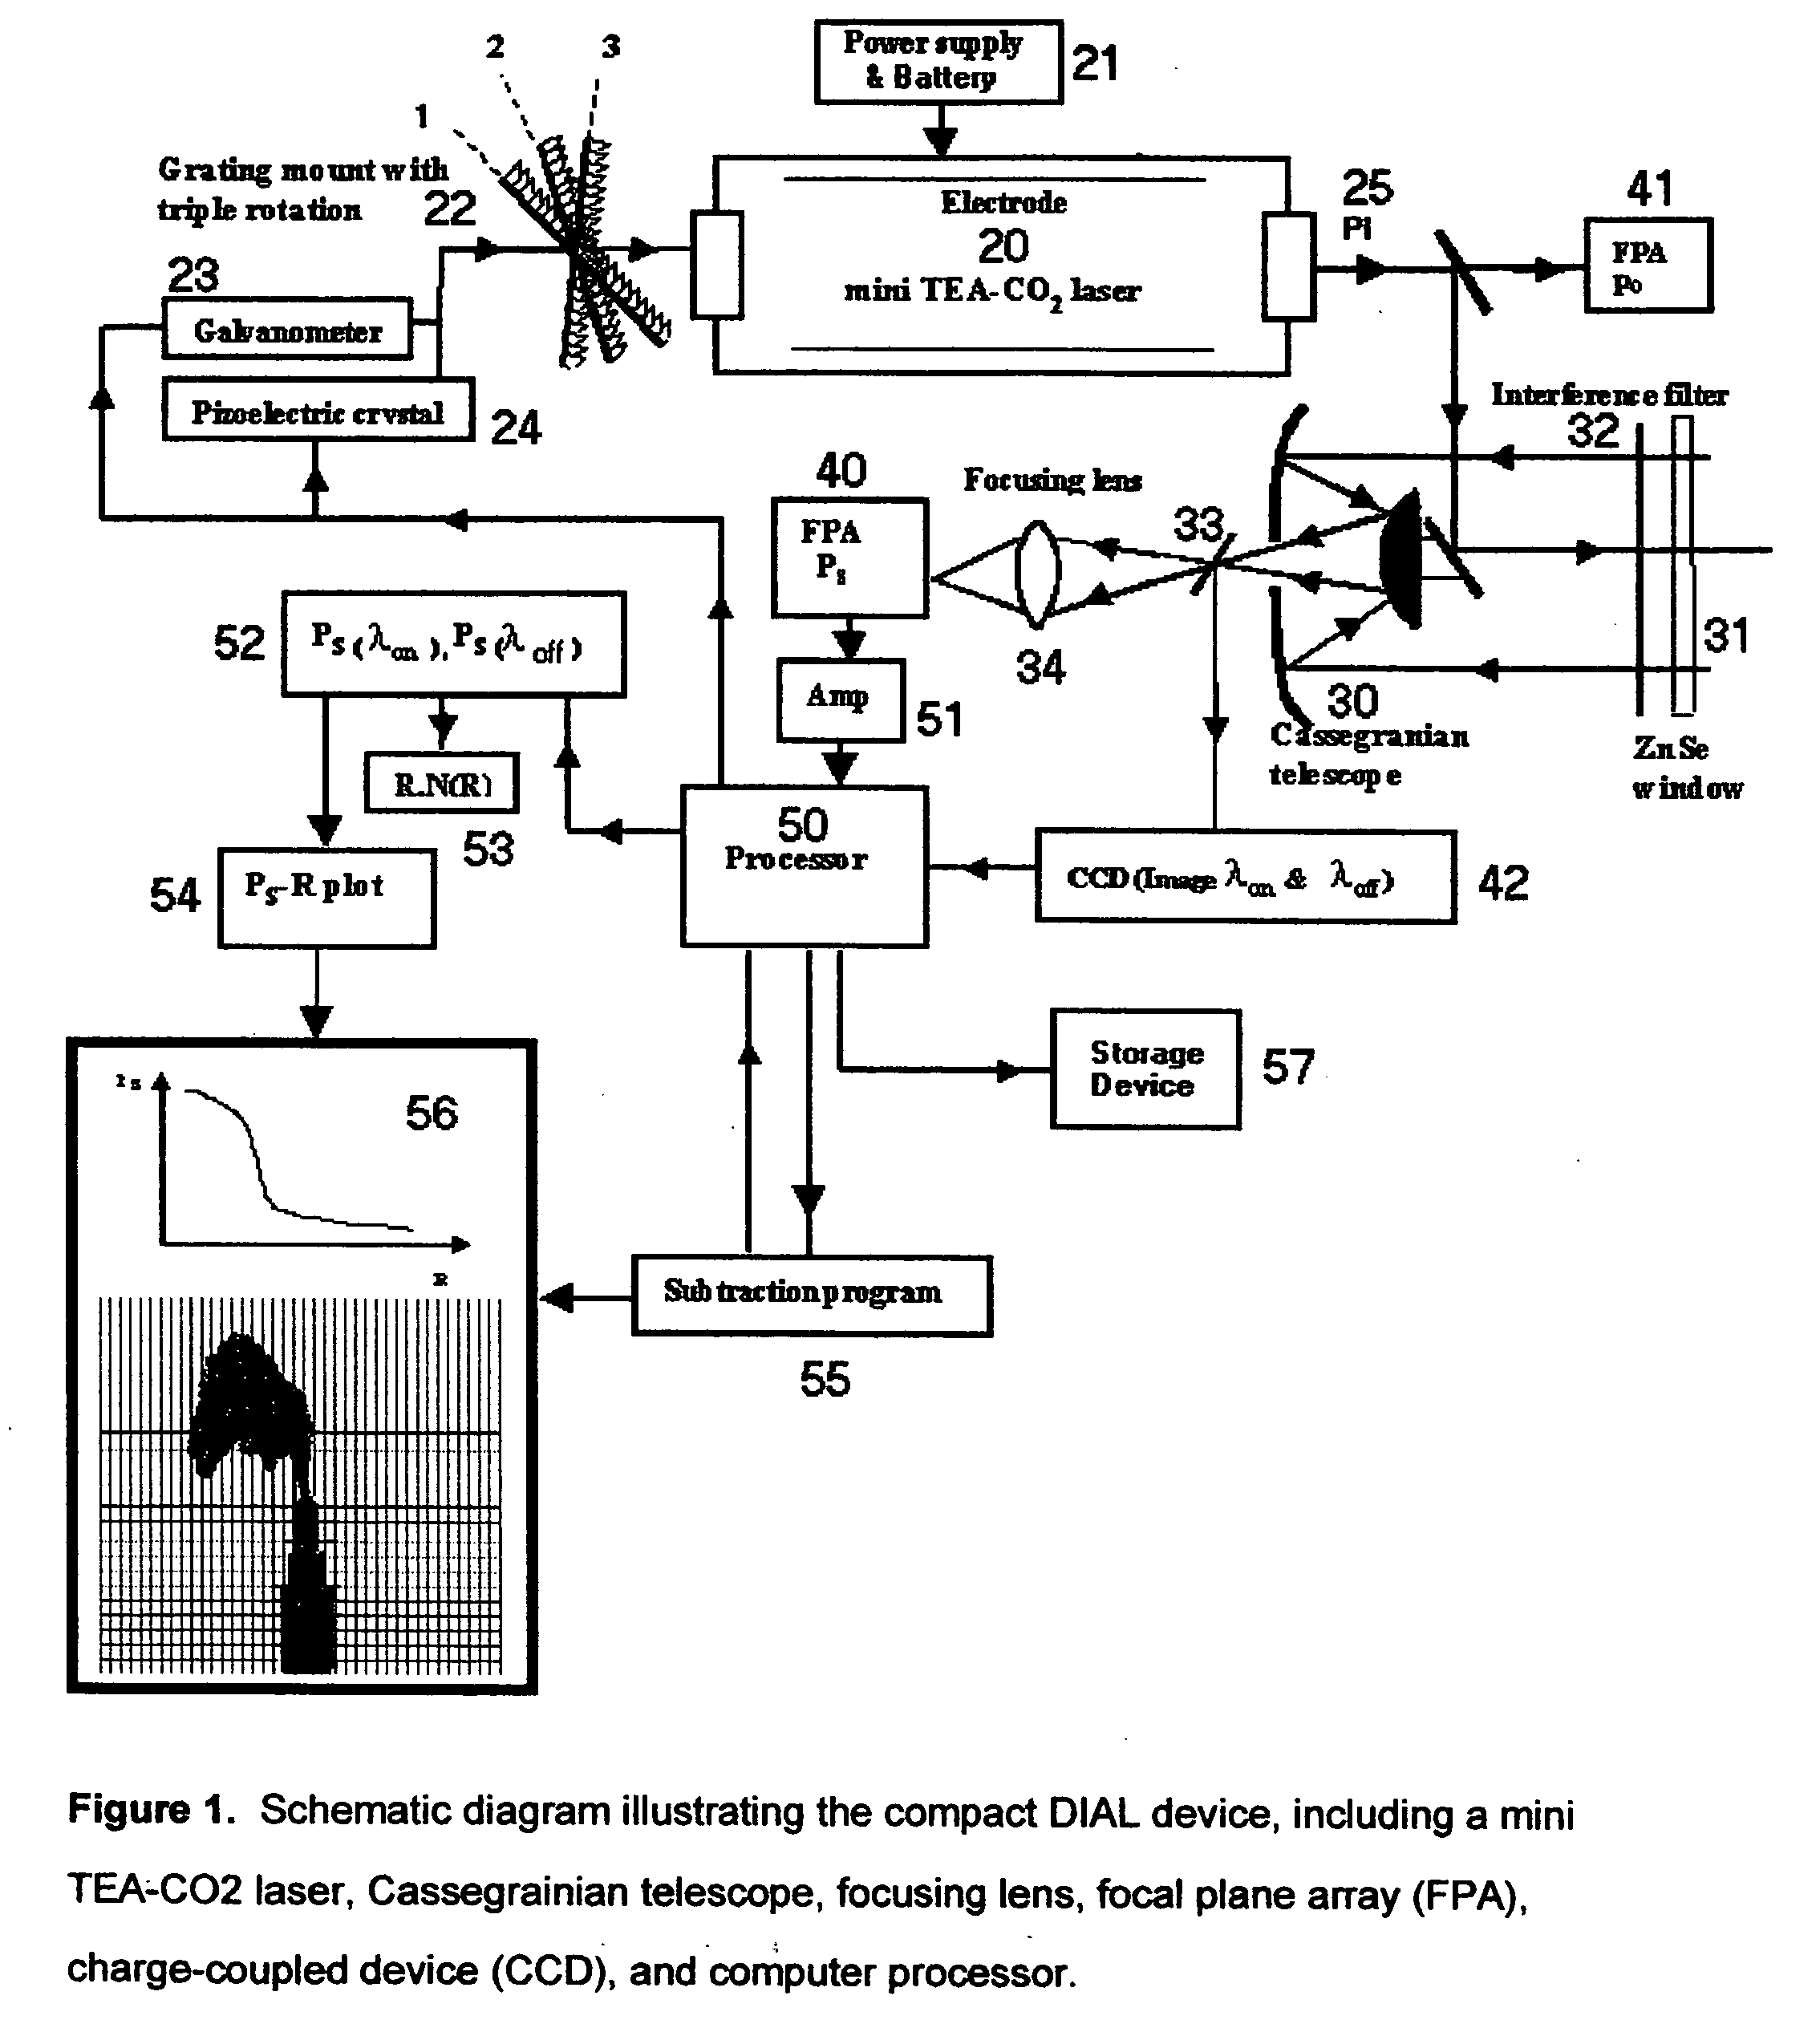 Machine for detecting sulfur hexafluoride (SF6) leaks using a carbon dioxide laser and the differential absorption lidar ( DIAL) technique and process for making same